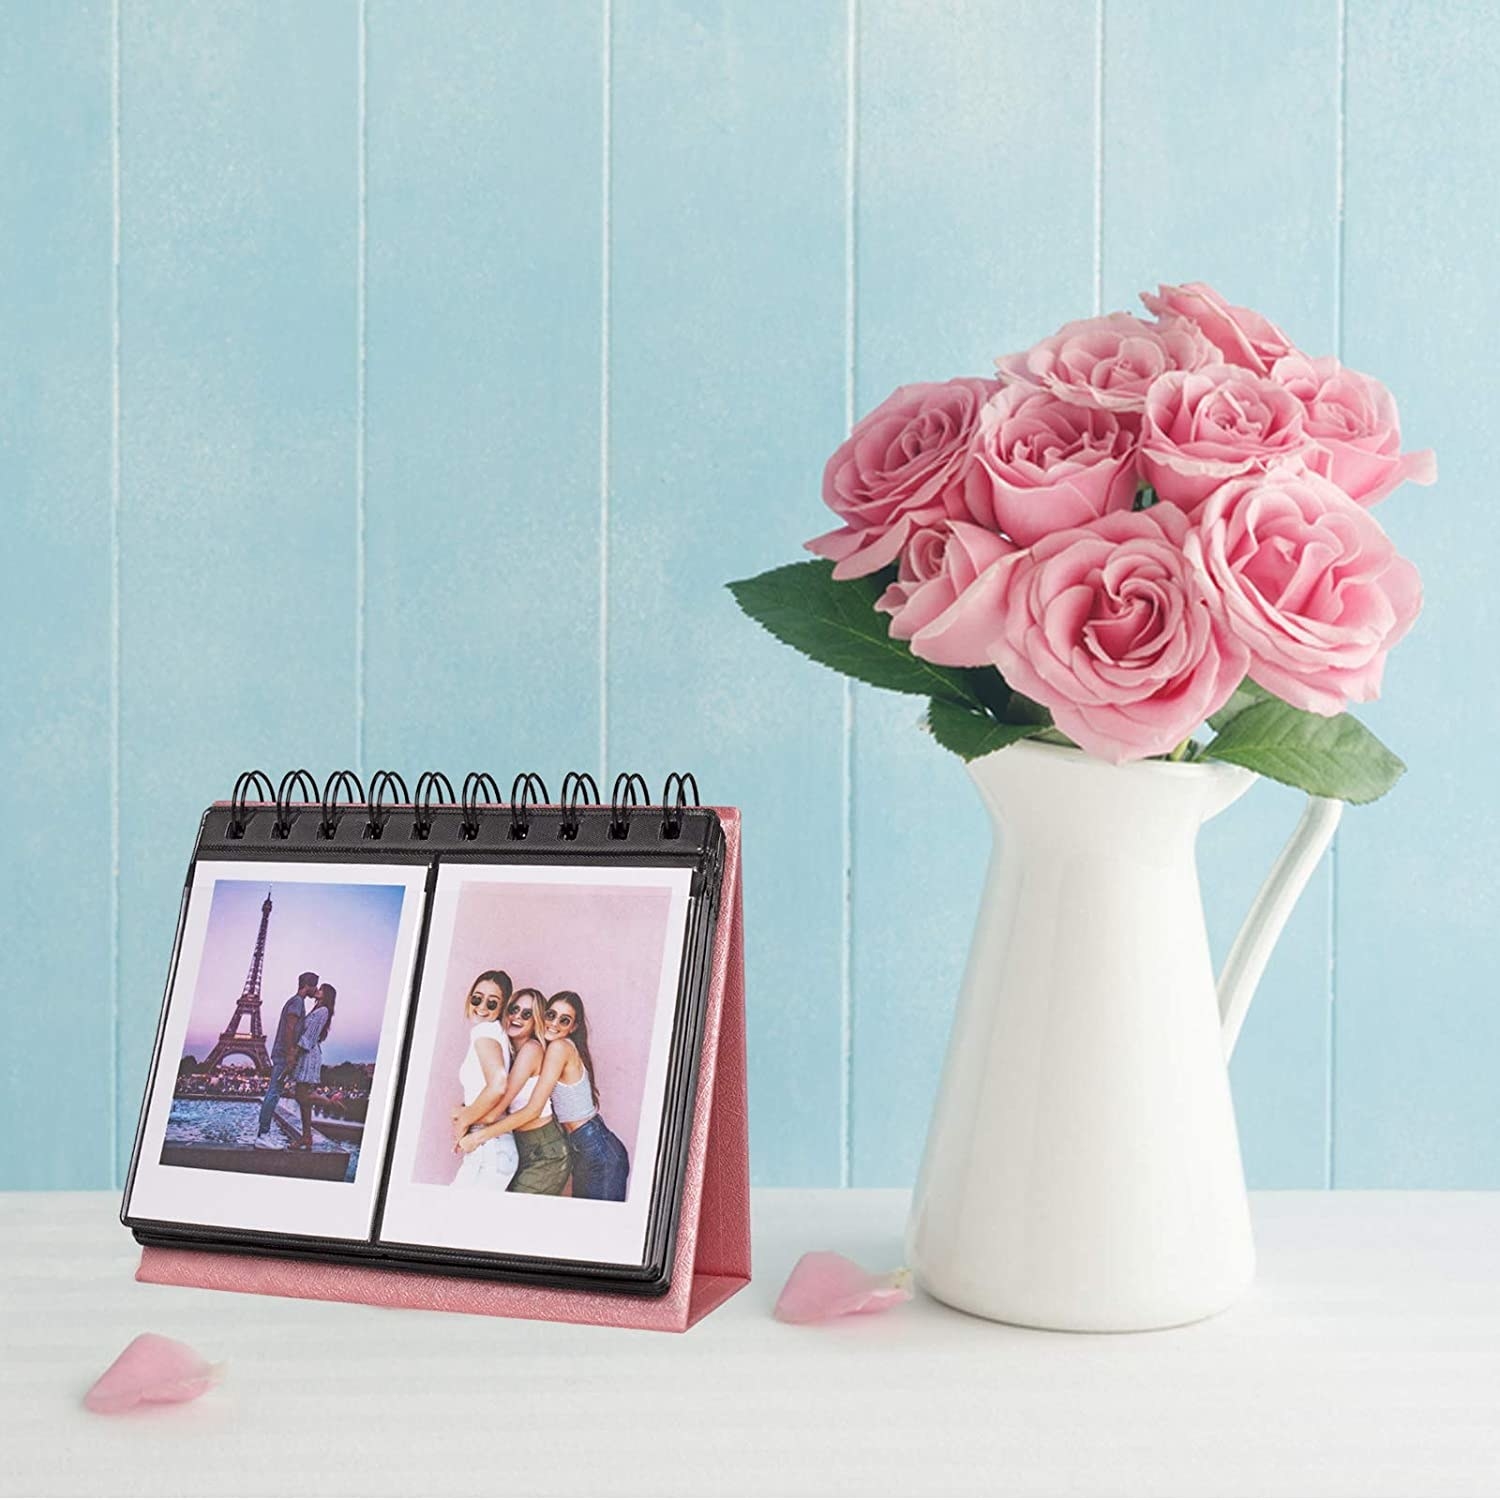 the photo album next to a vase filled with roses